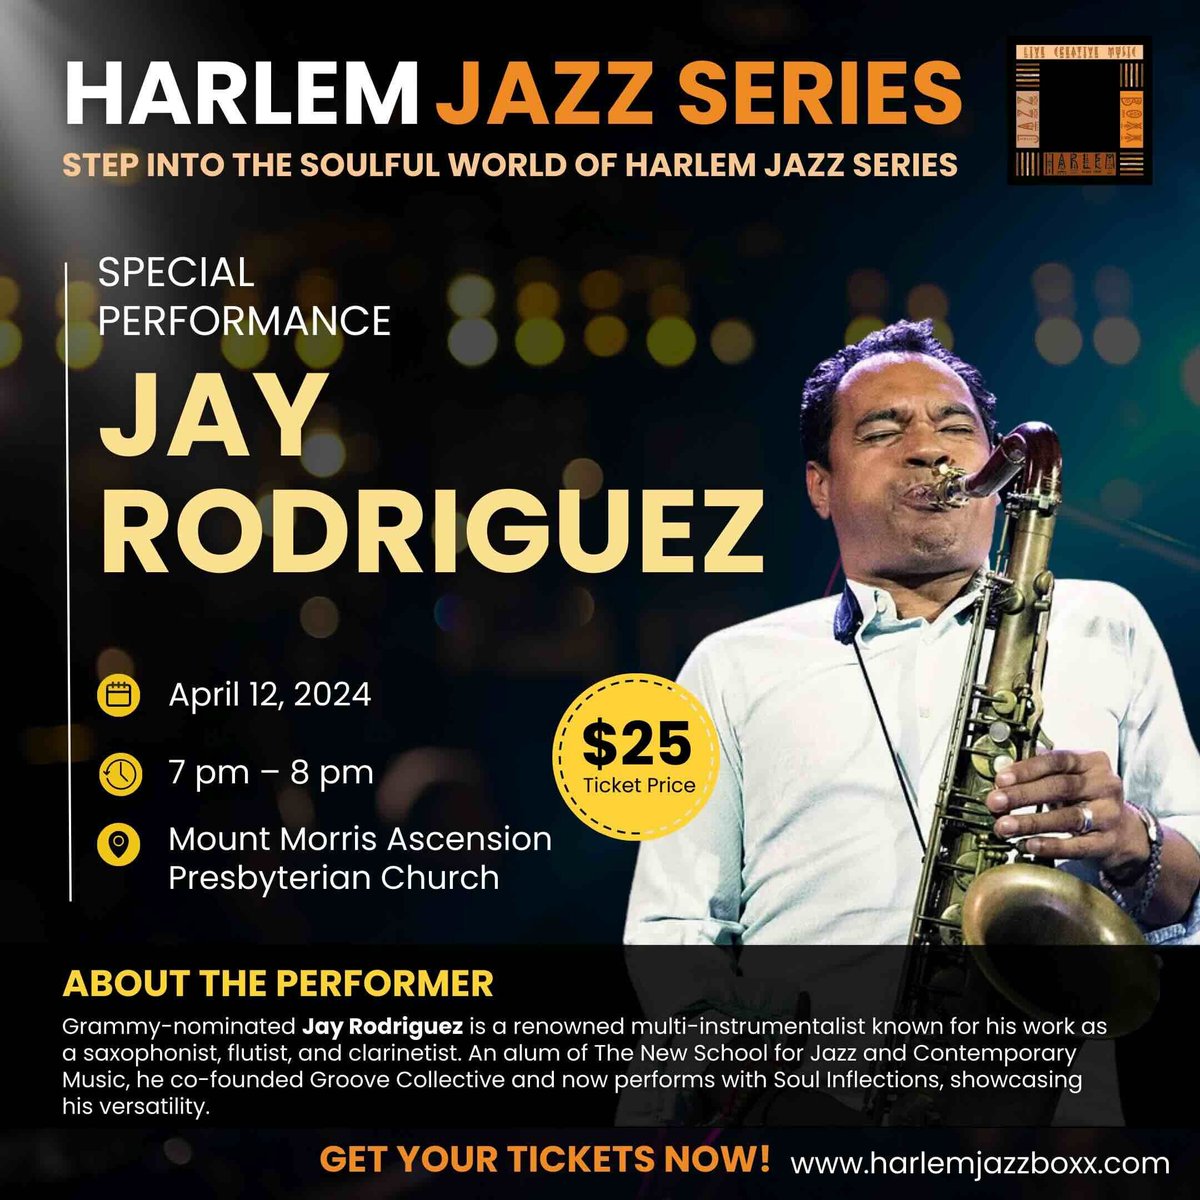 Catch the Harlem Jazz Series on April 12th with Jay Rodriguez, known for his diverse music collaborations. Enjoy a fusion of jazz styles at Mount Morris Ascension Presbyterian Church, 7 pm. Tickets: $25 at harlemjazzboxx.com/?utm_source=fb…